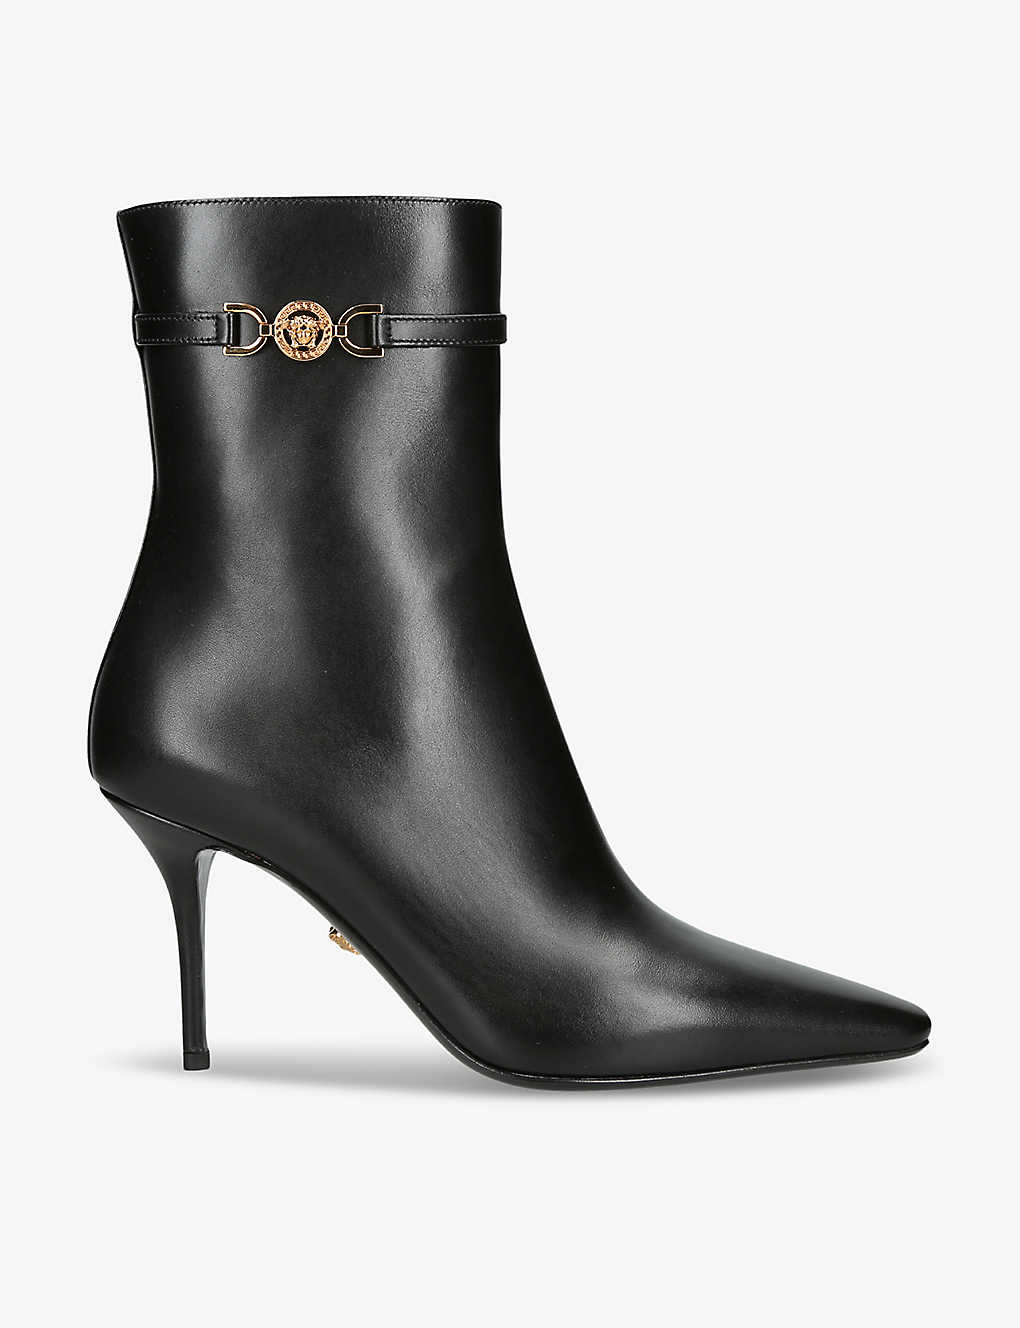 VERSACE MEDUSA 85 LEATHER ANKLE BOOTS